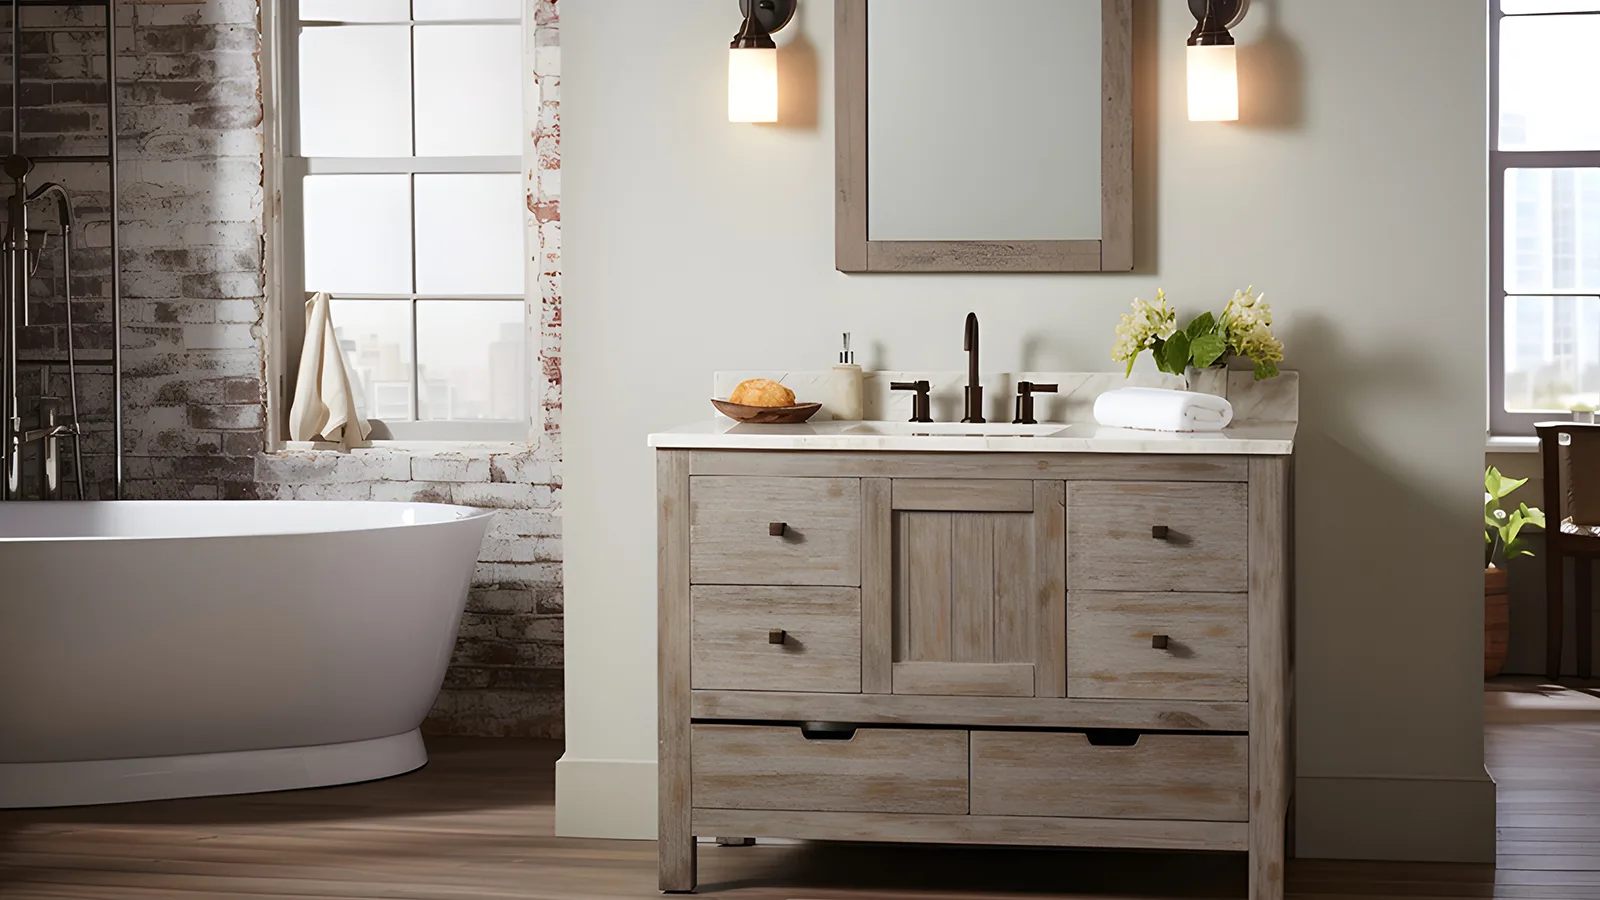 Discover tips on how to decorate an apartment bathroom featuring a wooden vanity and a tub.